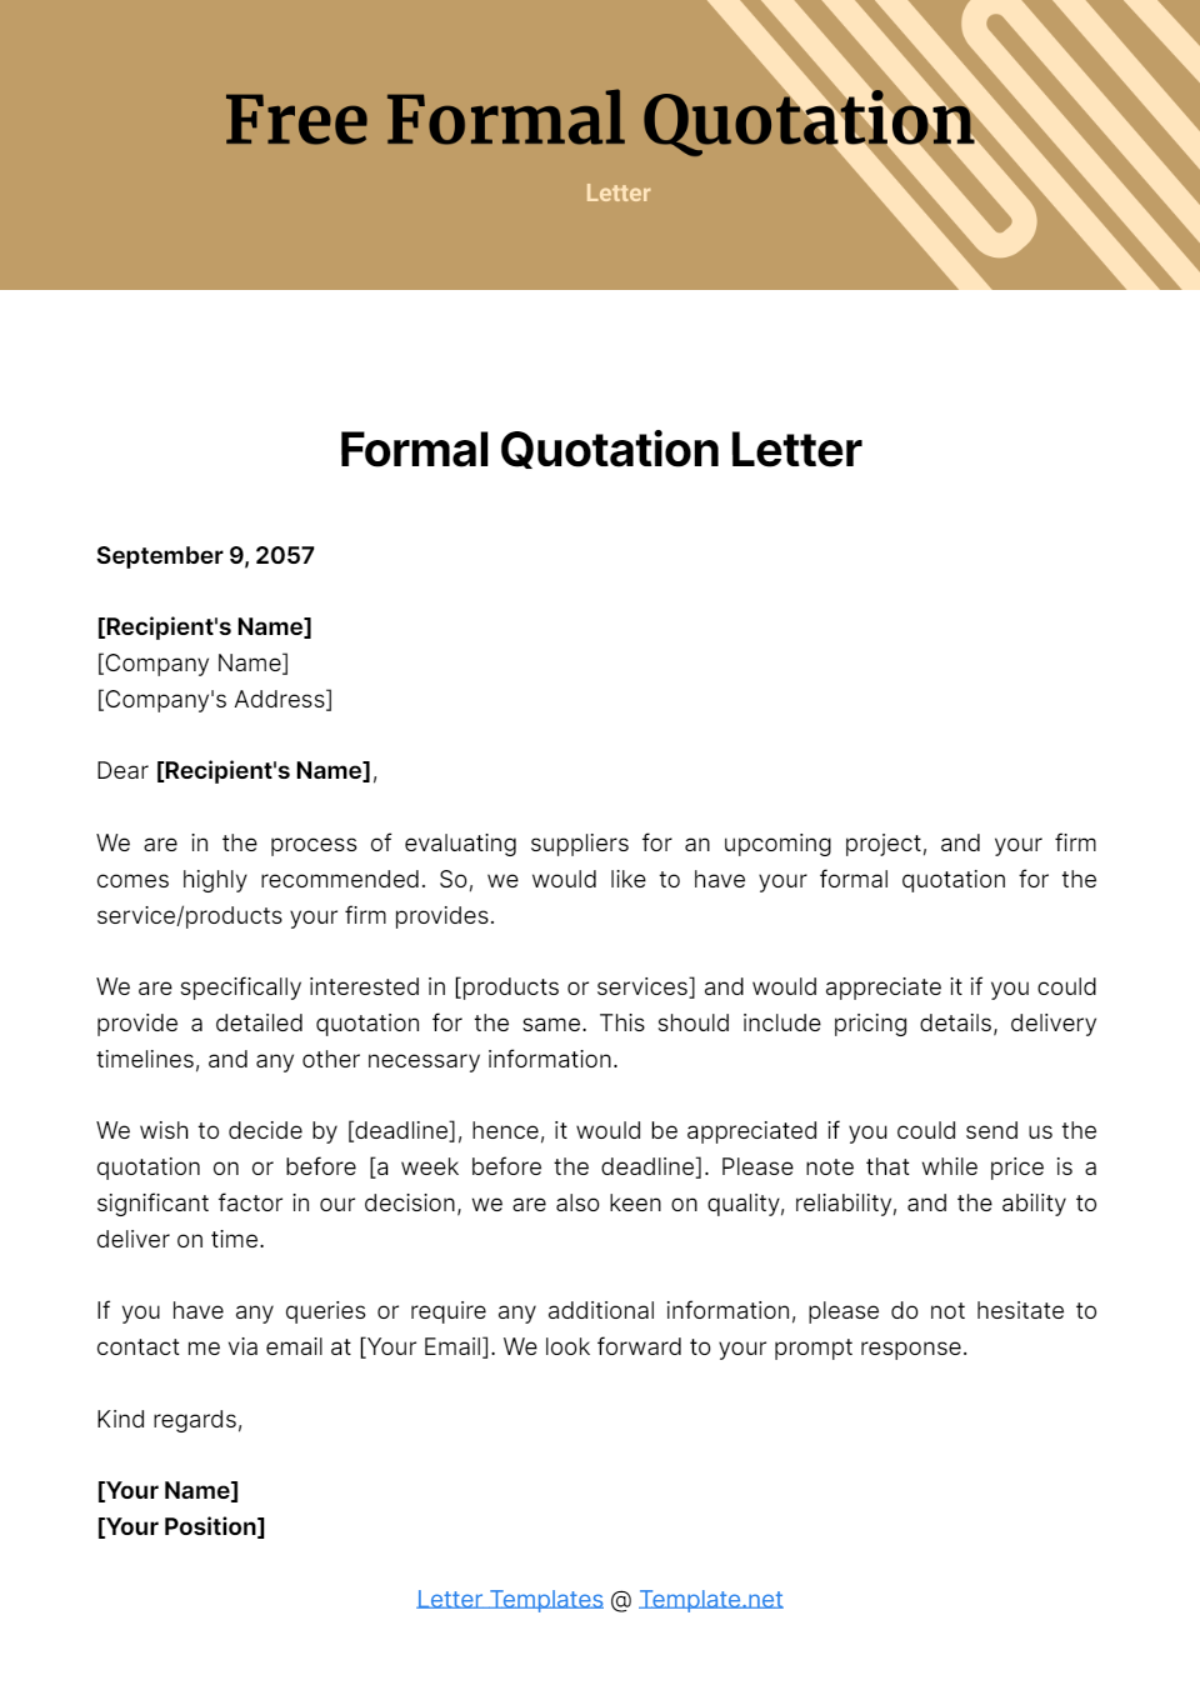 Free Formal Quotation Letter Template